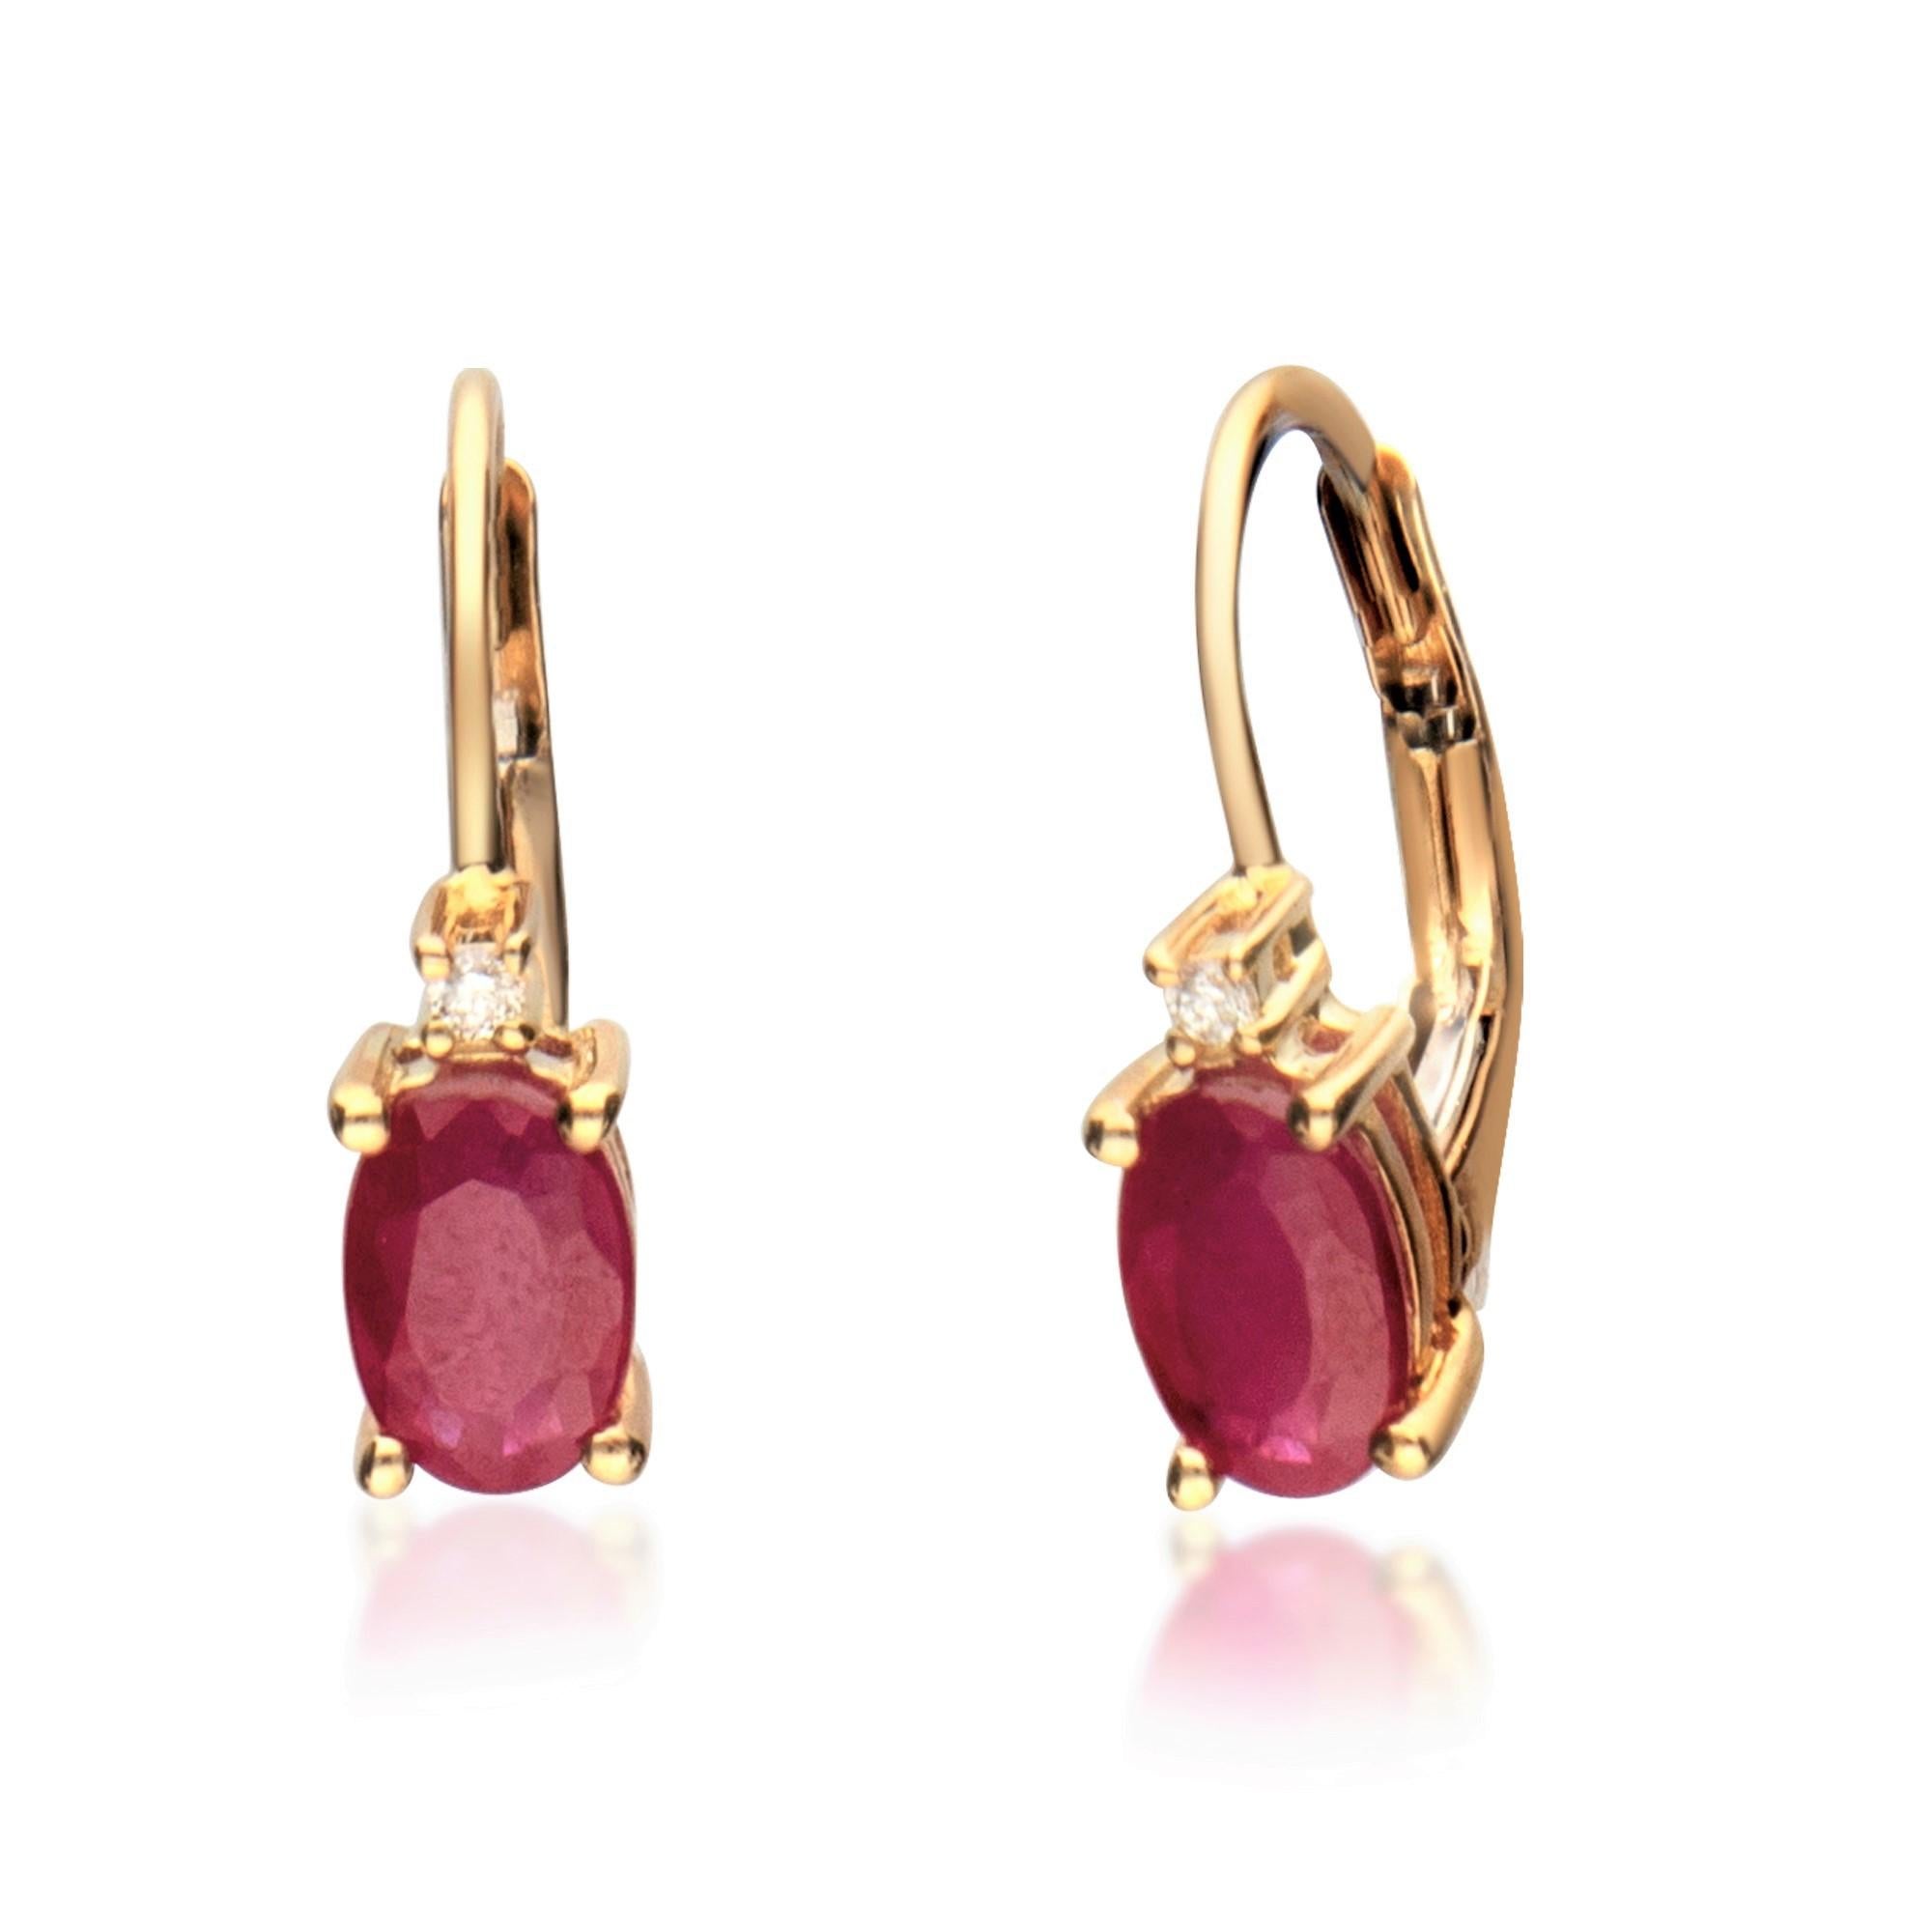 Decorate yourself in elegance with this Earring is crafted from 10K Yellow Gold by Gin & Grace Earring. This Earring is made up of 6X8 Oval-Cut prong setting Genuine Ruby (2 pcs) 1.12 Carat and Round-Cut prong setting Diamond (2 pcs) 0.02 Carat.